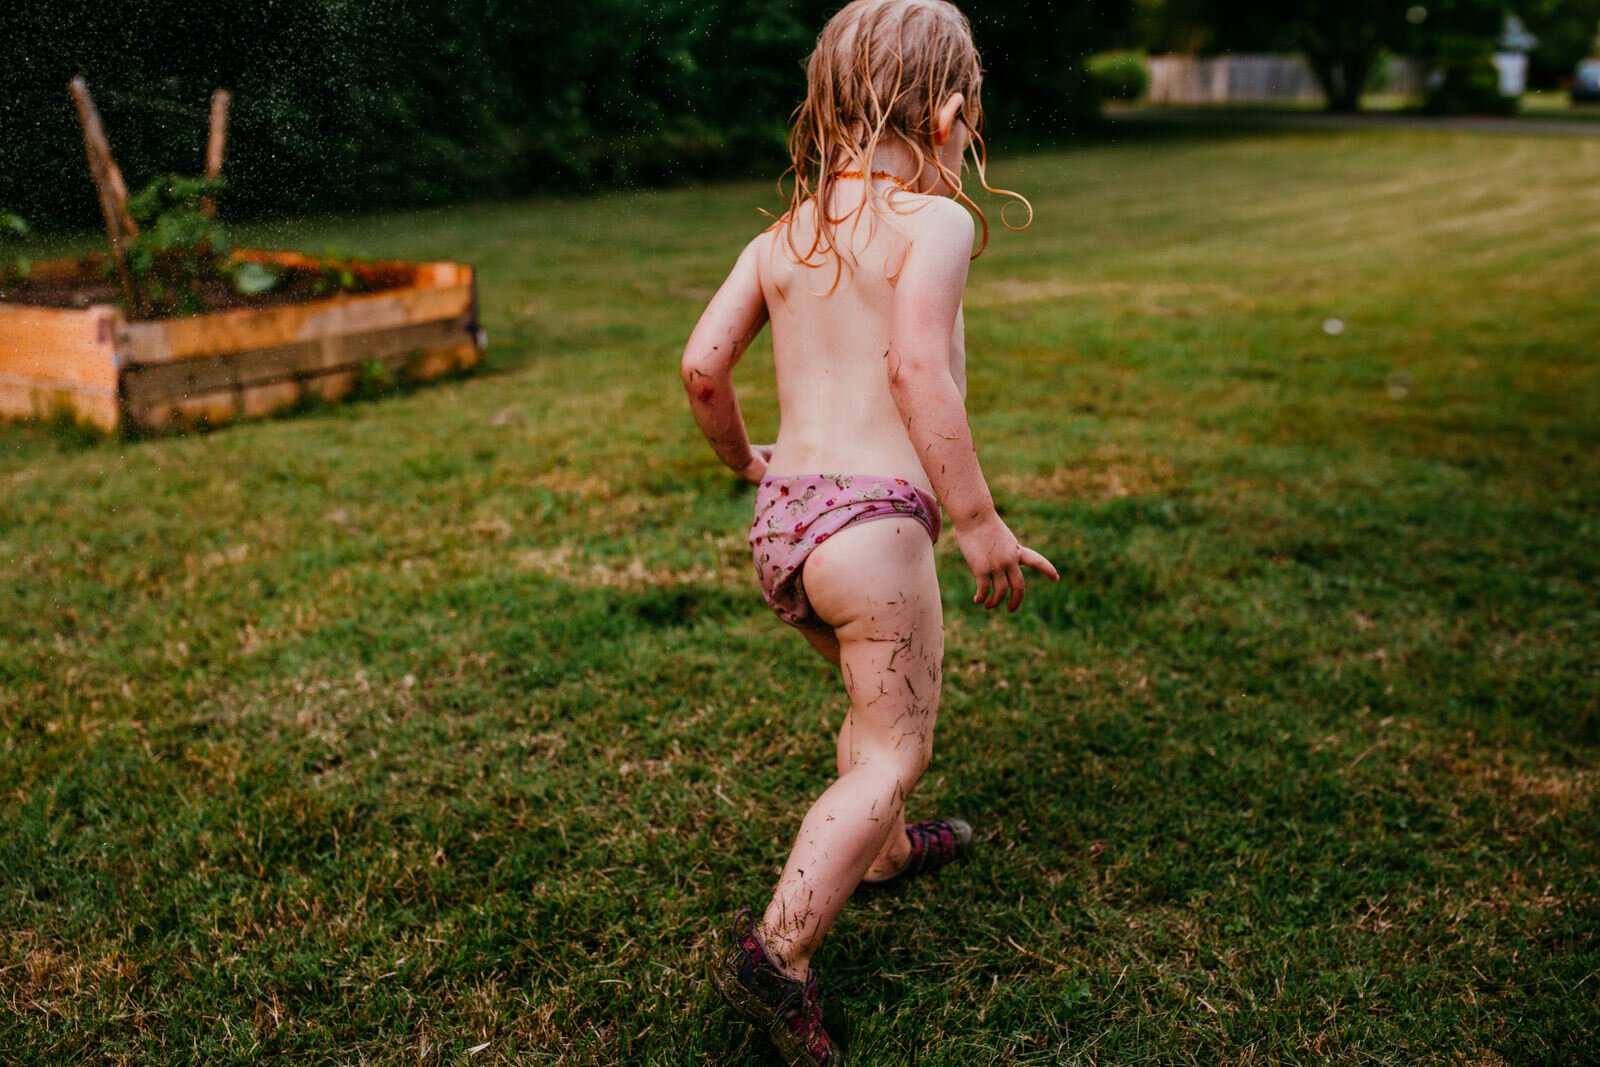 little girl walk in her garden soaking wet after playing with hose